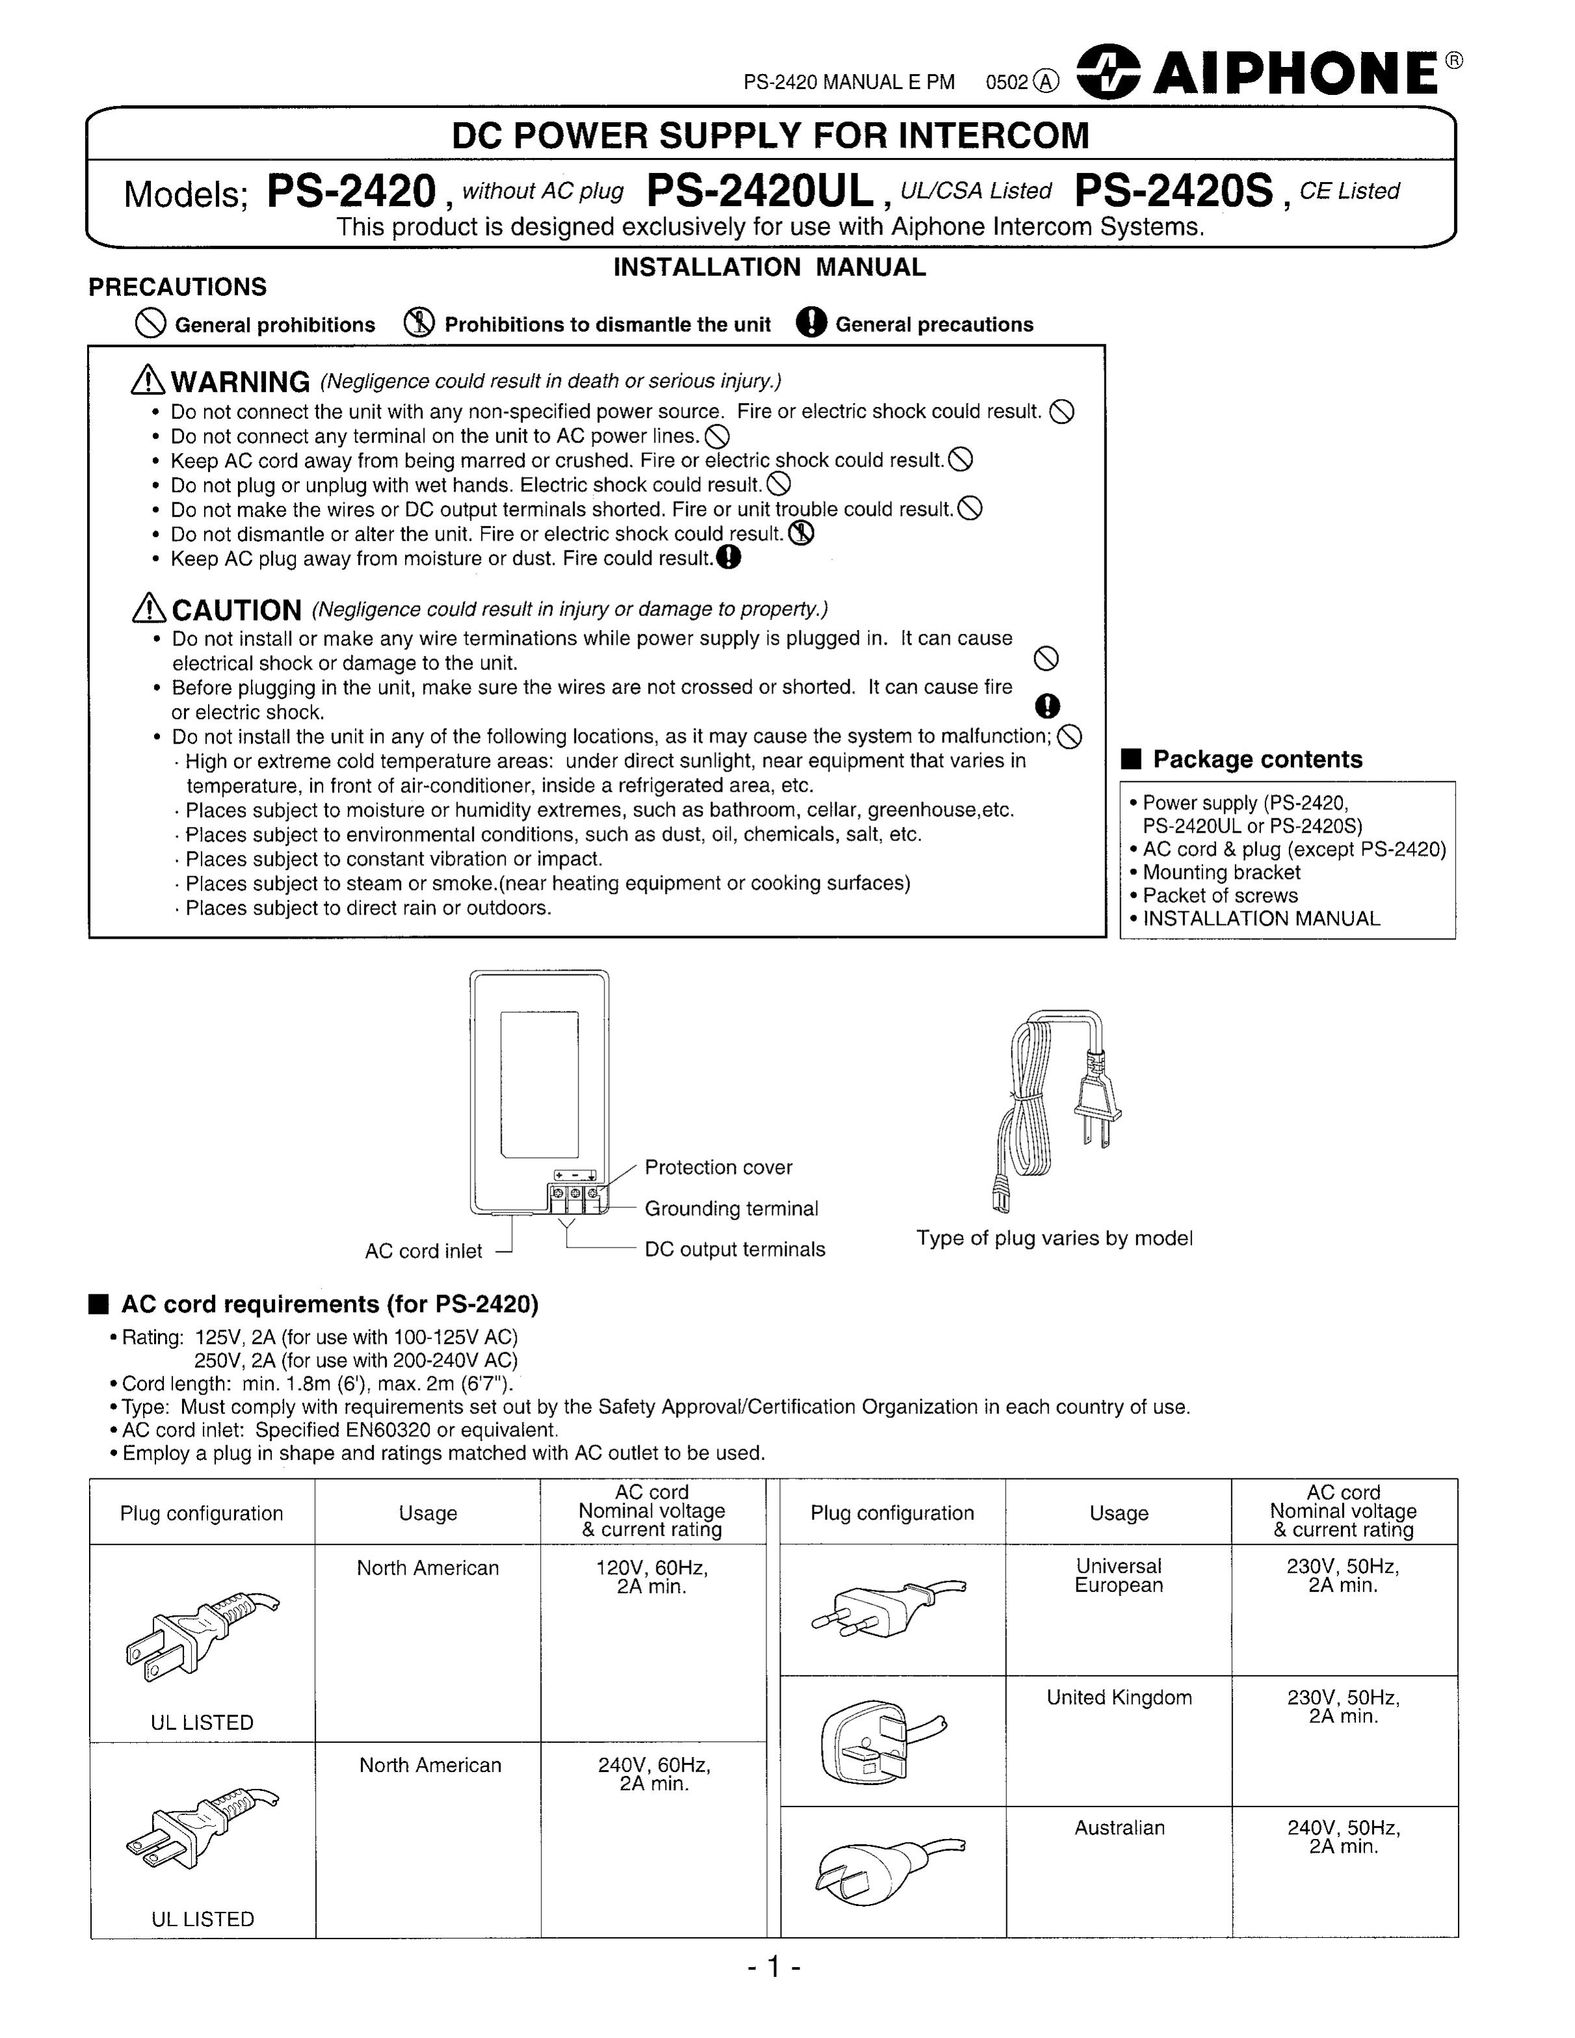 Aiphone PS-2420 Welding System User Manual